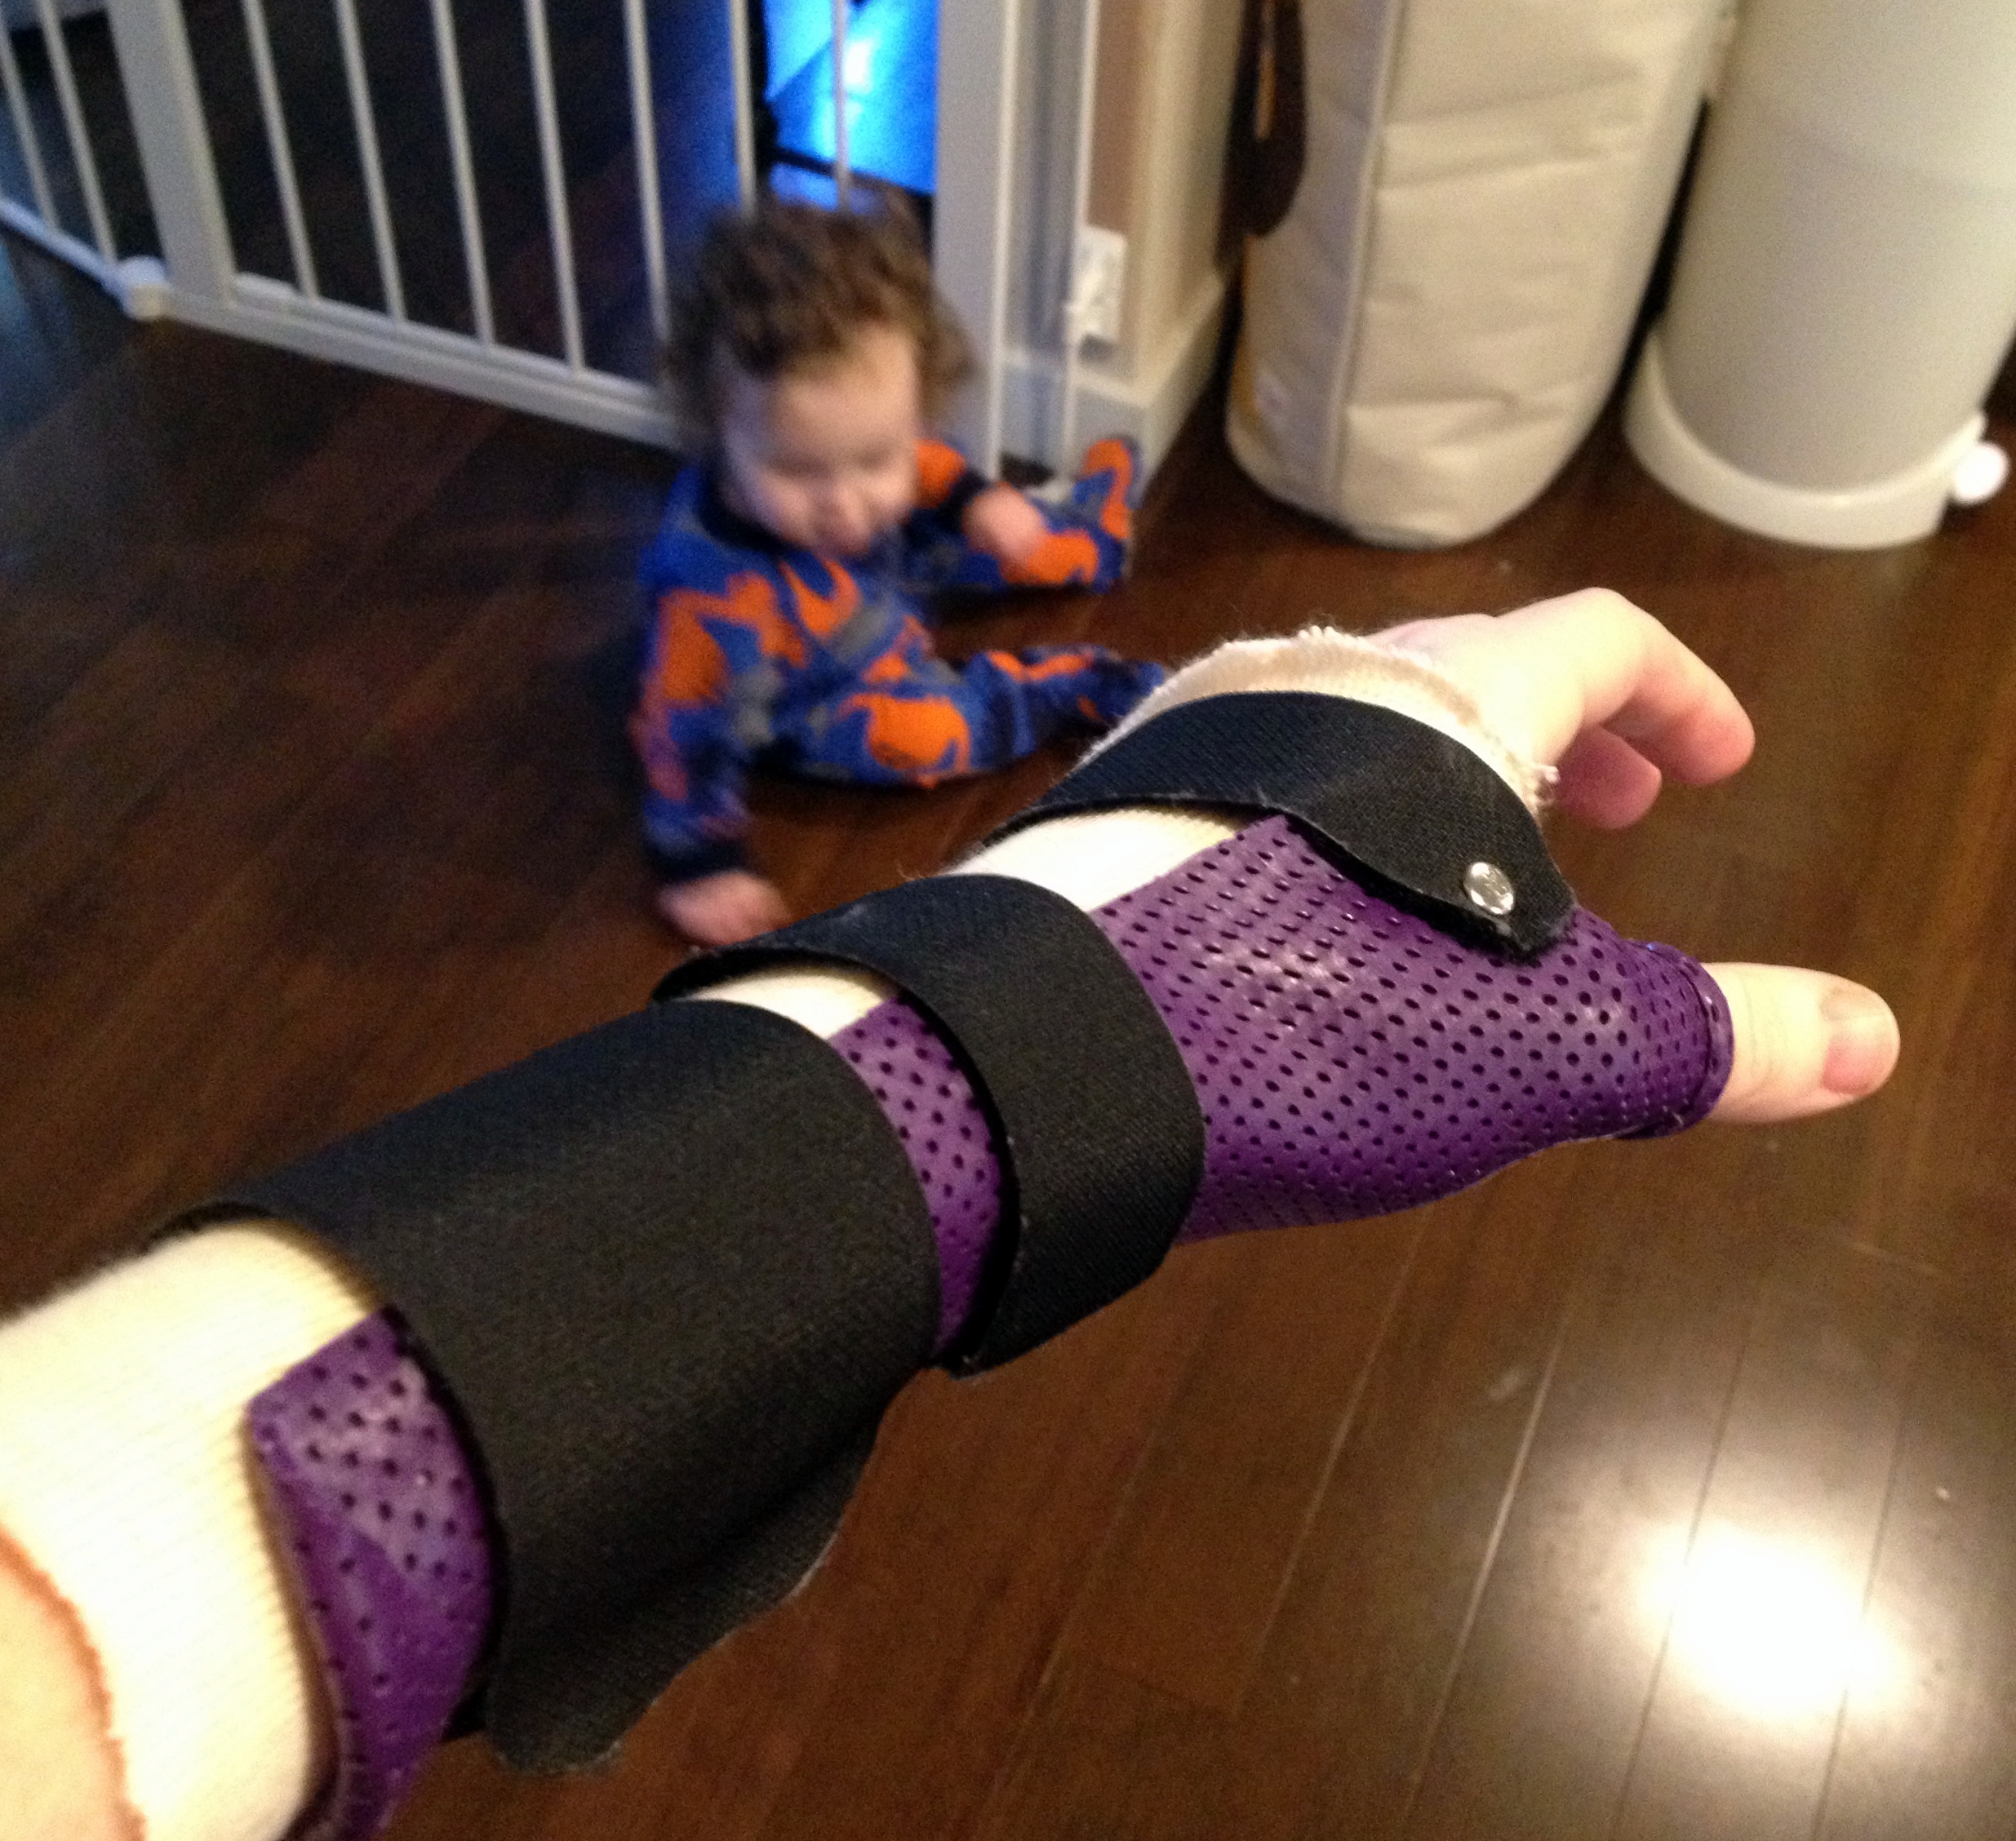 My hard splint made of thermoplastic helps keep my wrist and thumb protected as I lift and carry Charlie.